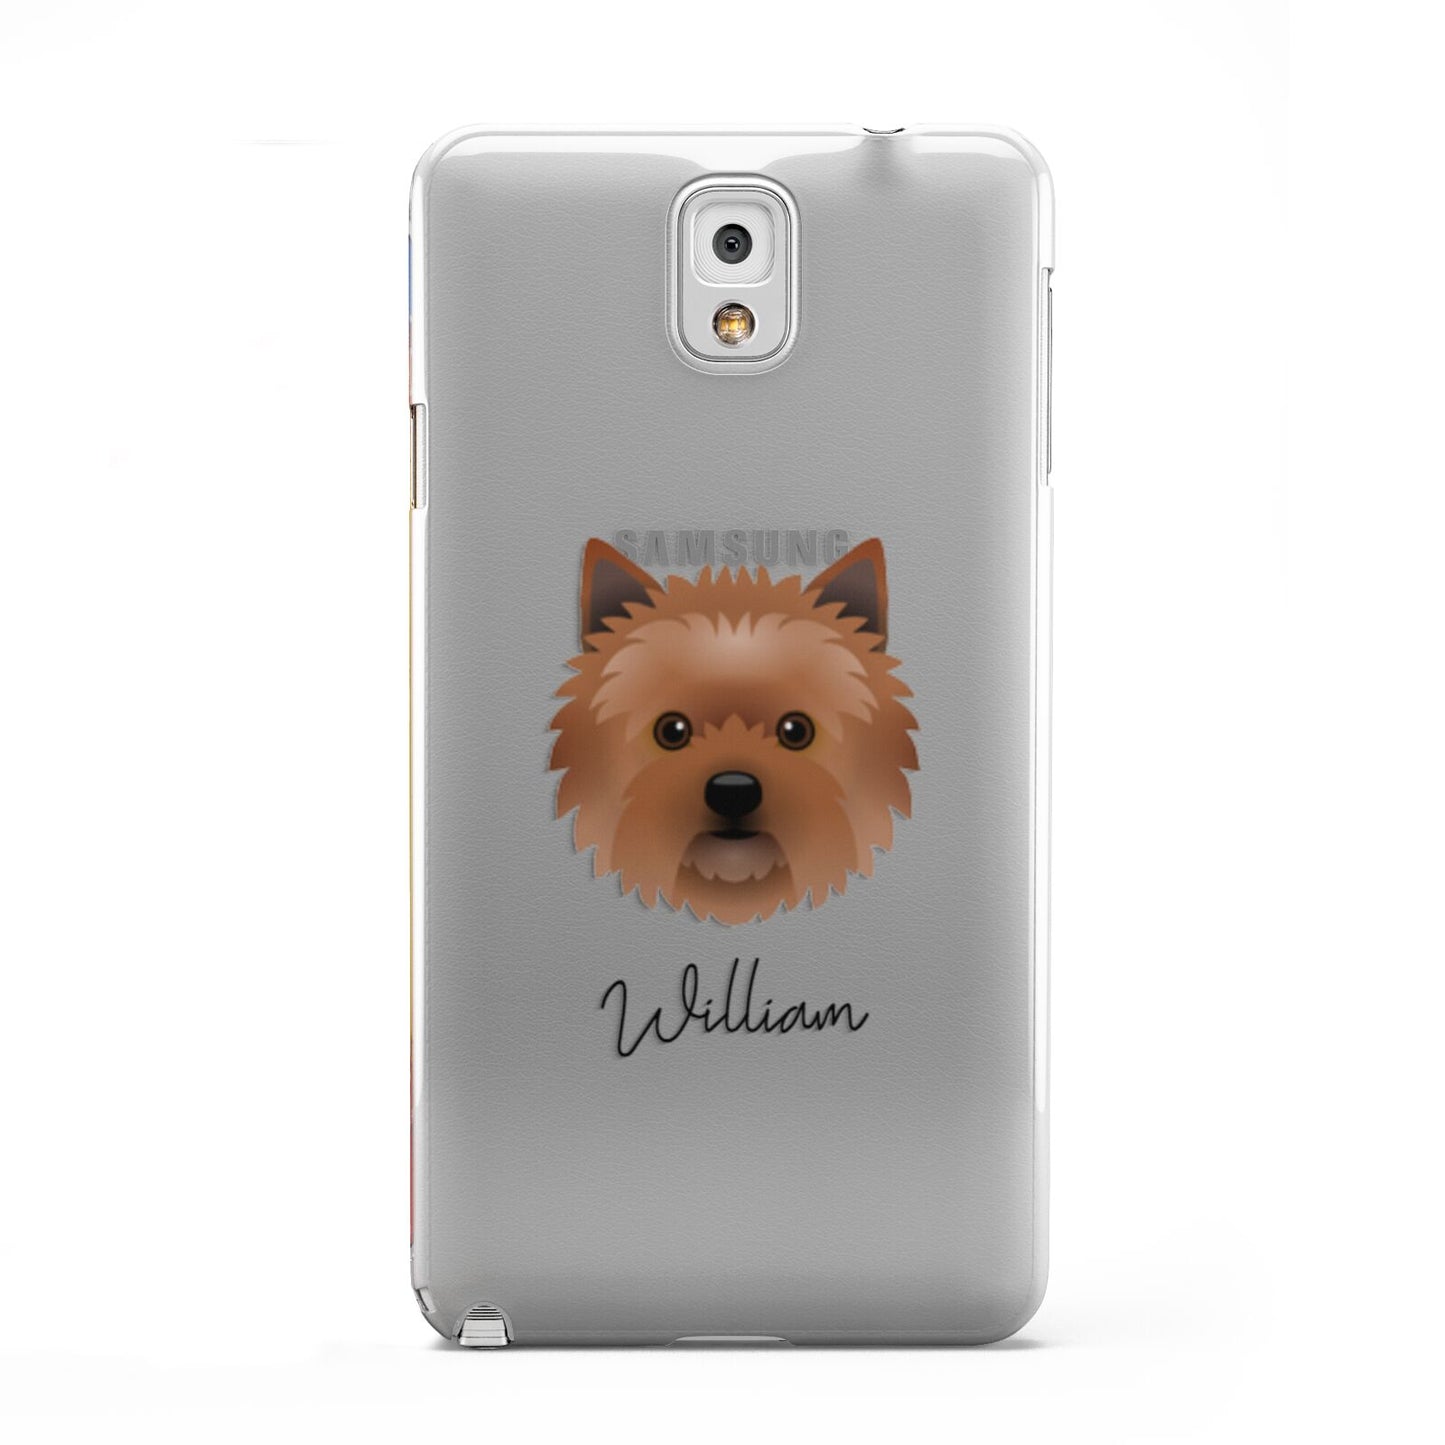 Cairn Terrier Personalised Samsung Galaxy Note 3 Case